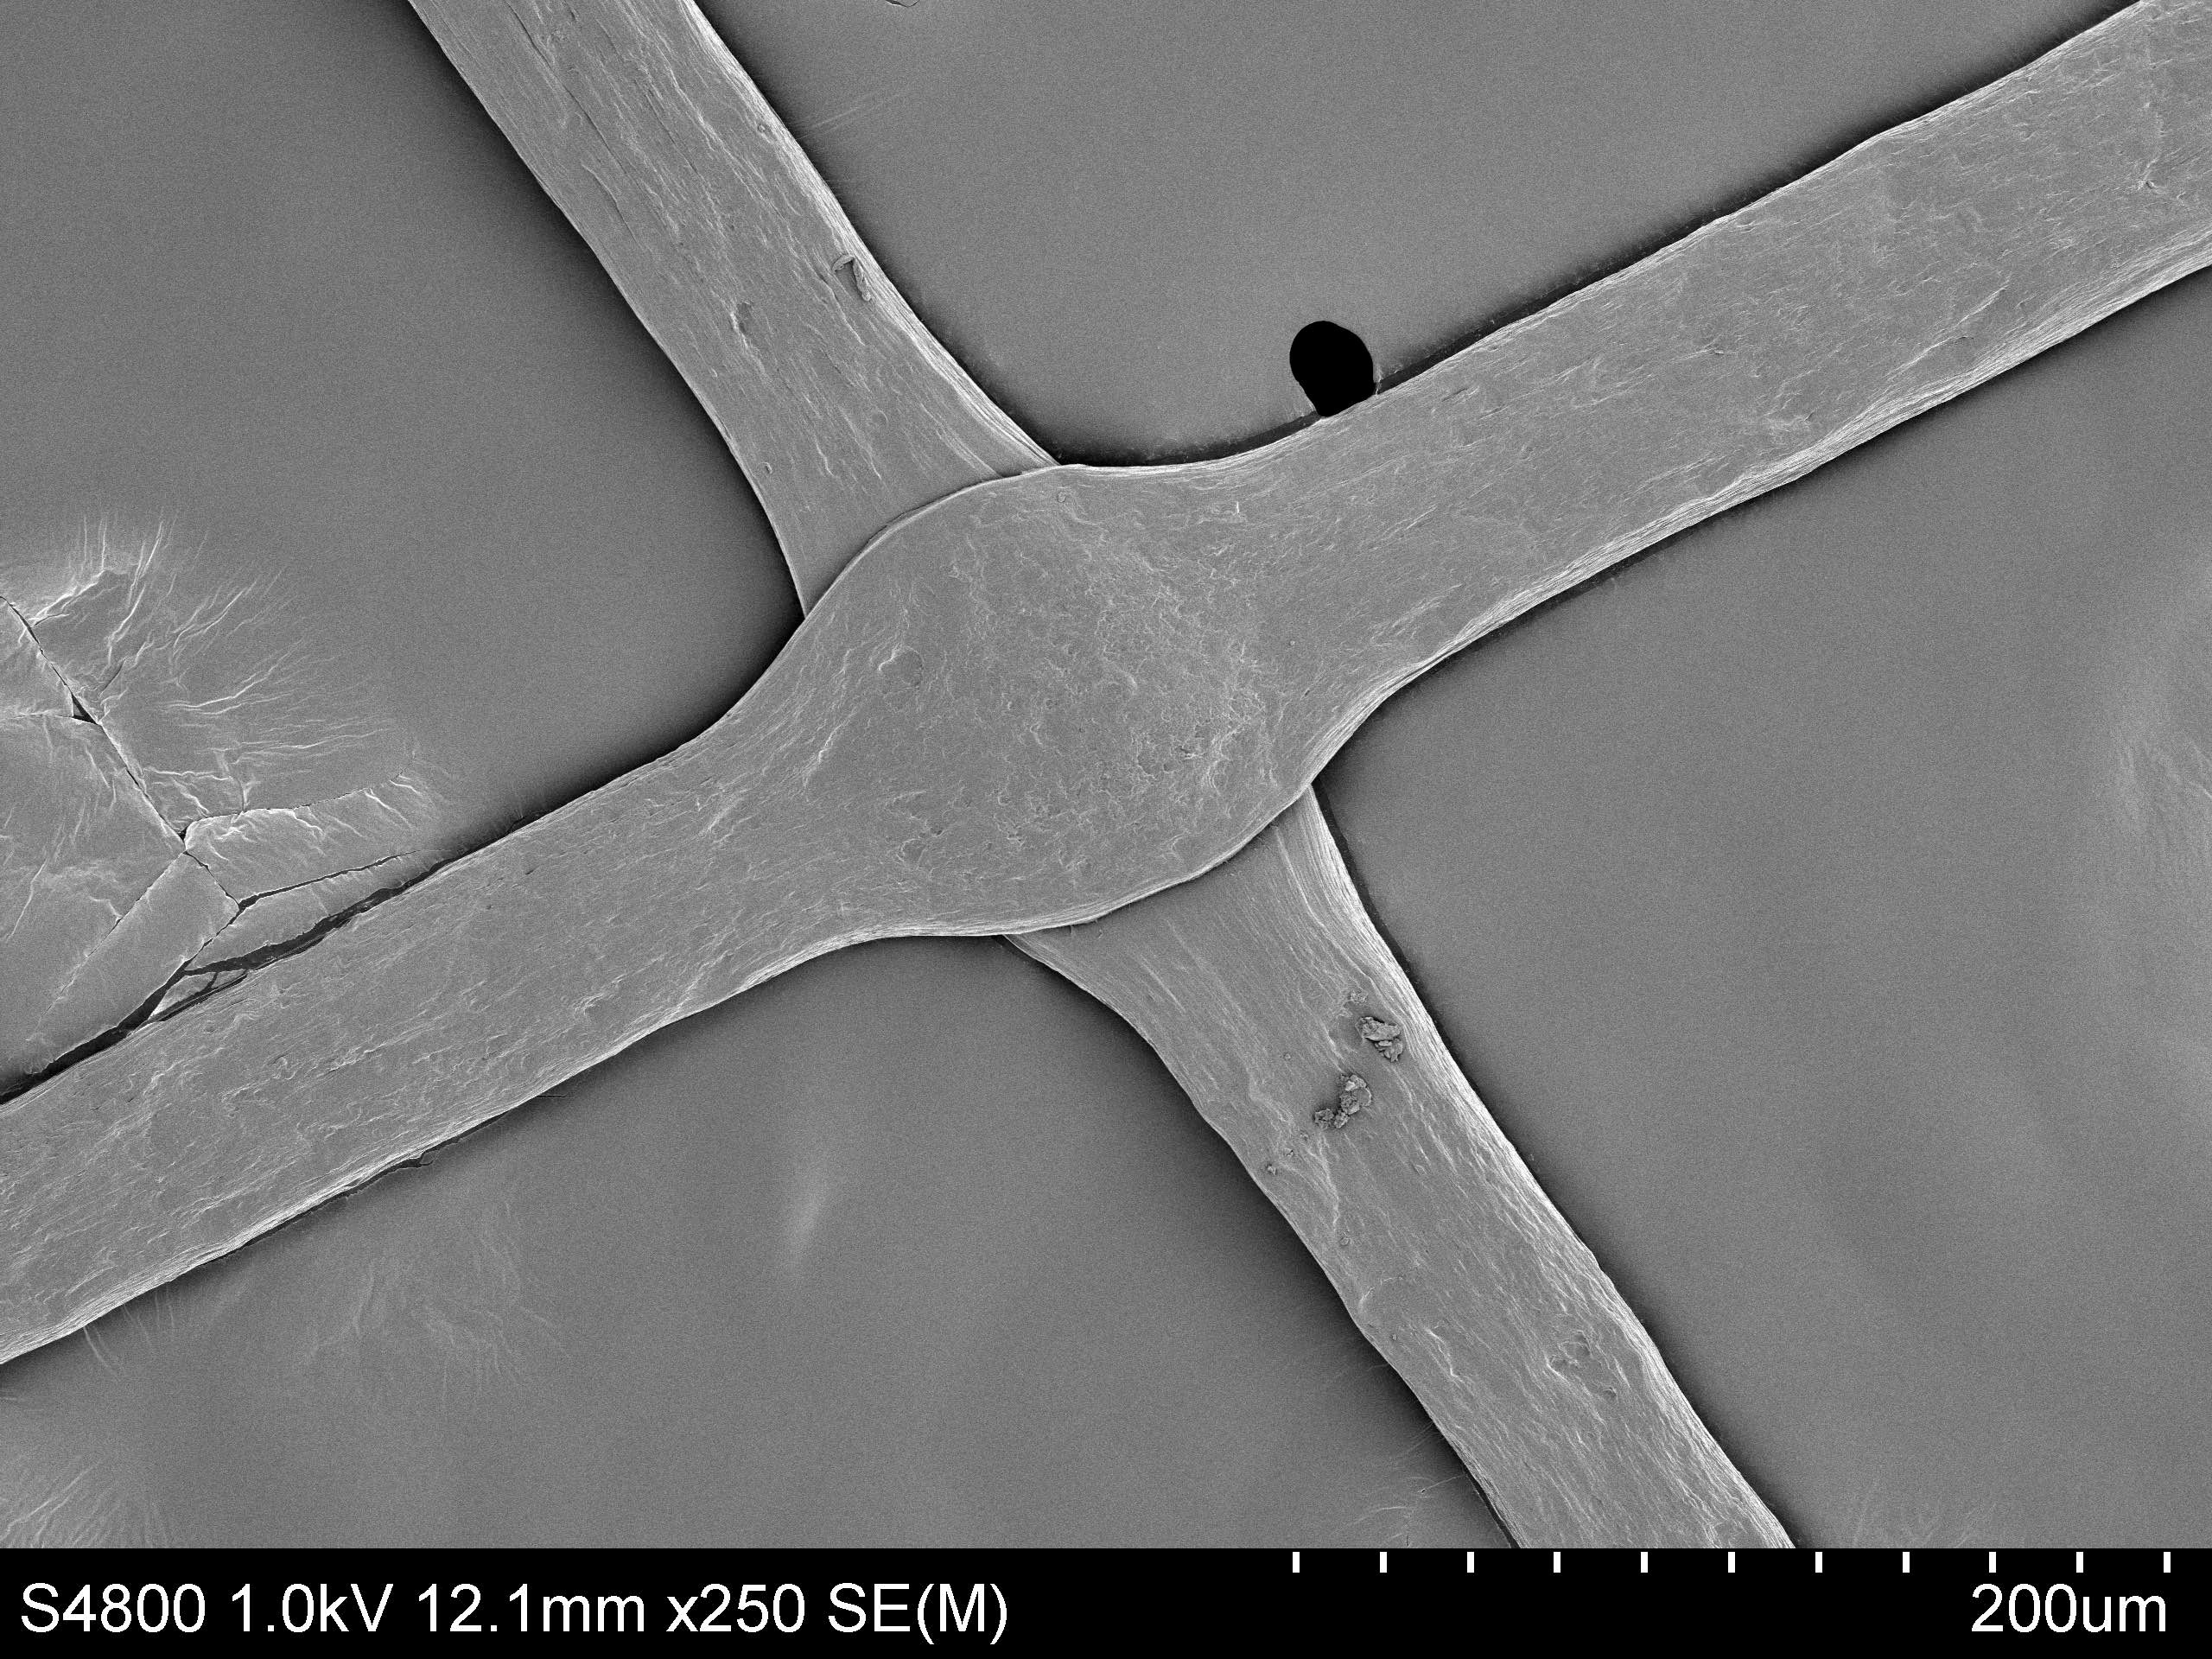 Microscopic picture of highly aligned, strong model filaments of cellulose.